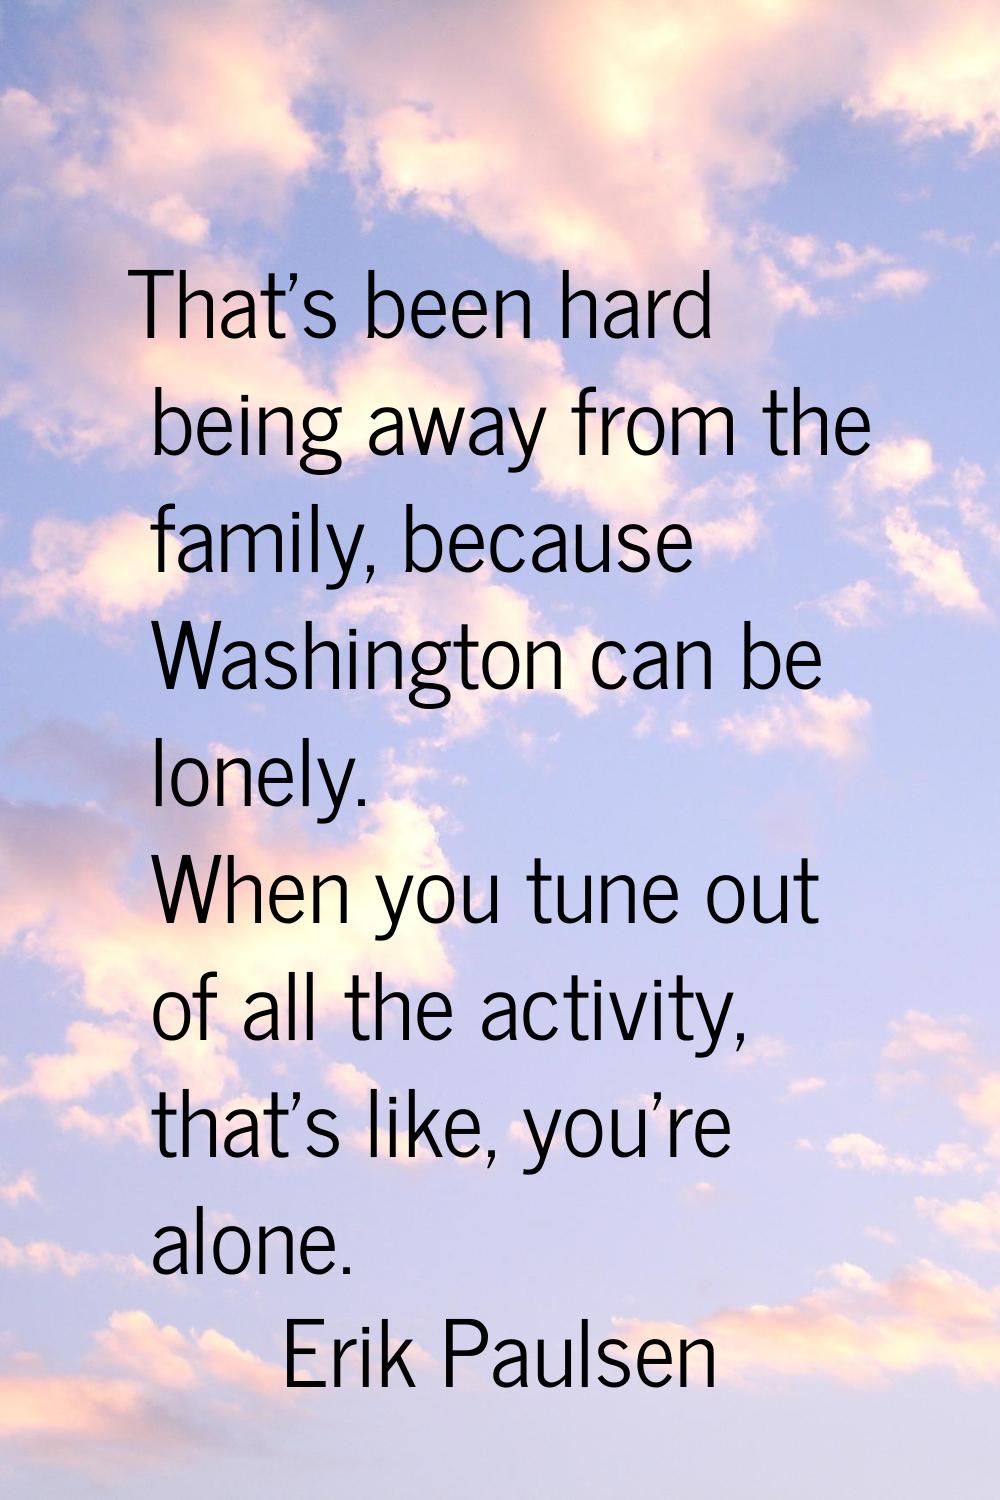 That's been hard being away from the family, because Washington can be lonely. When you tune out of